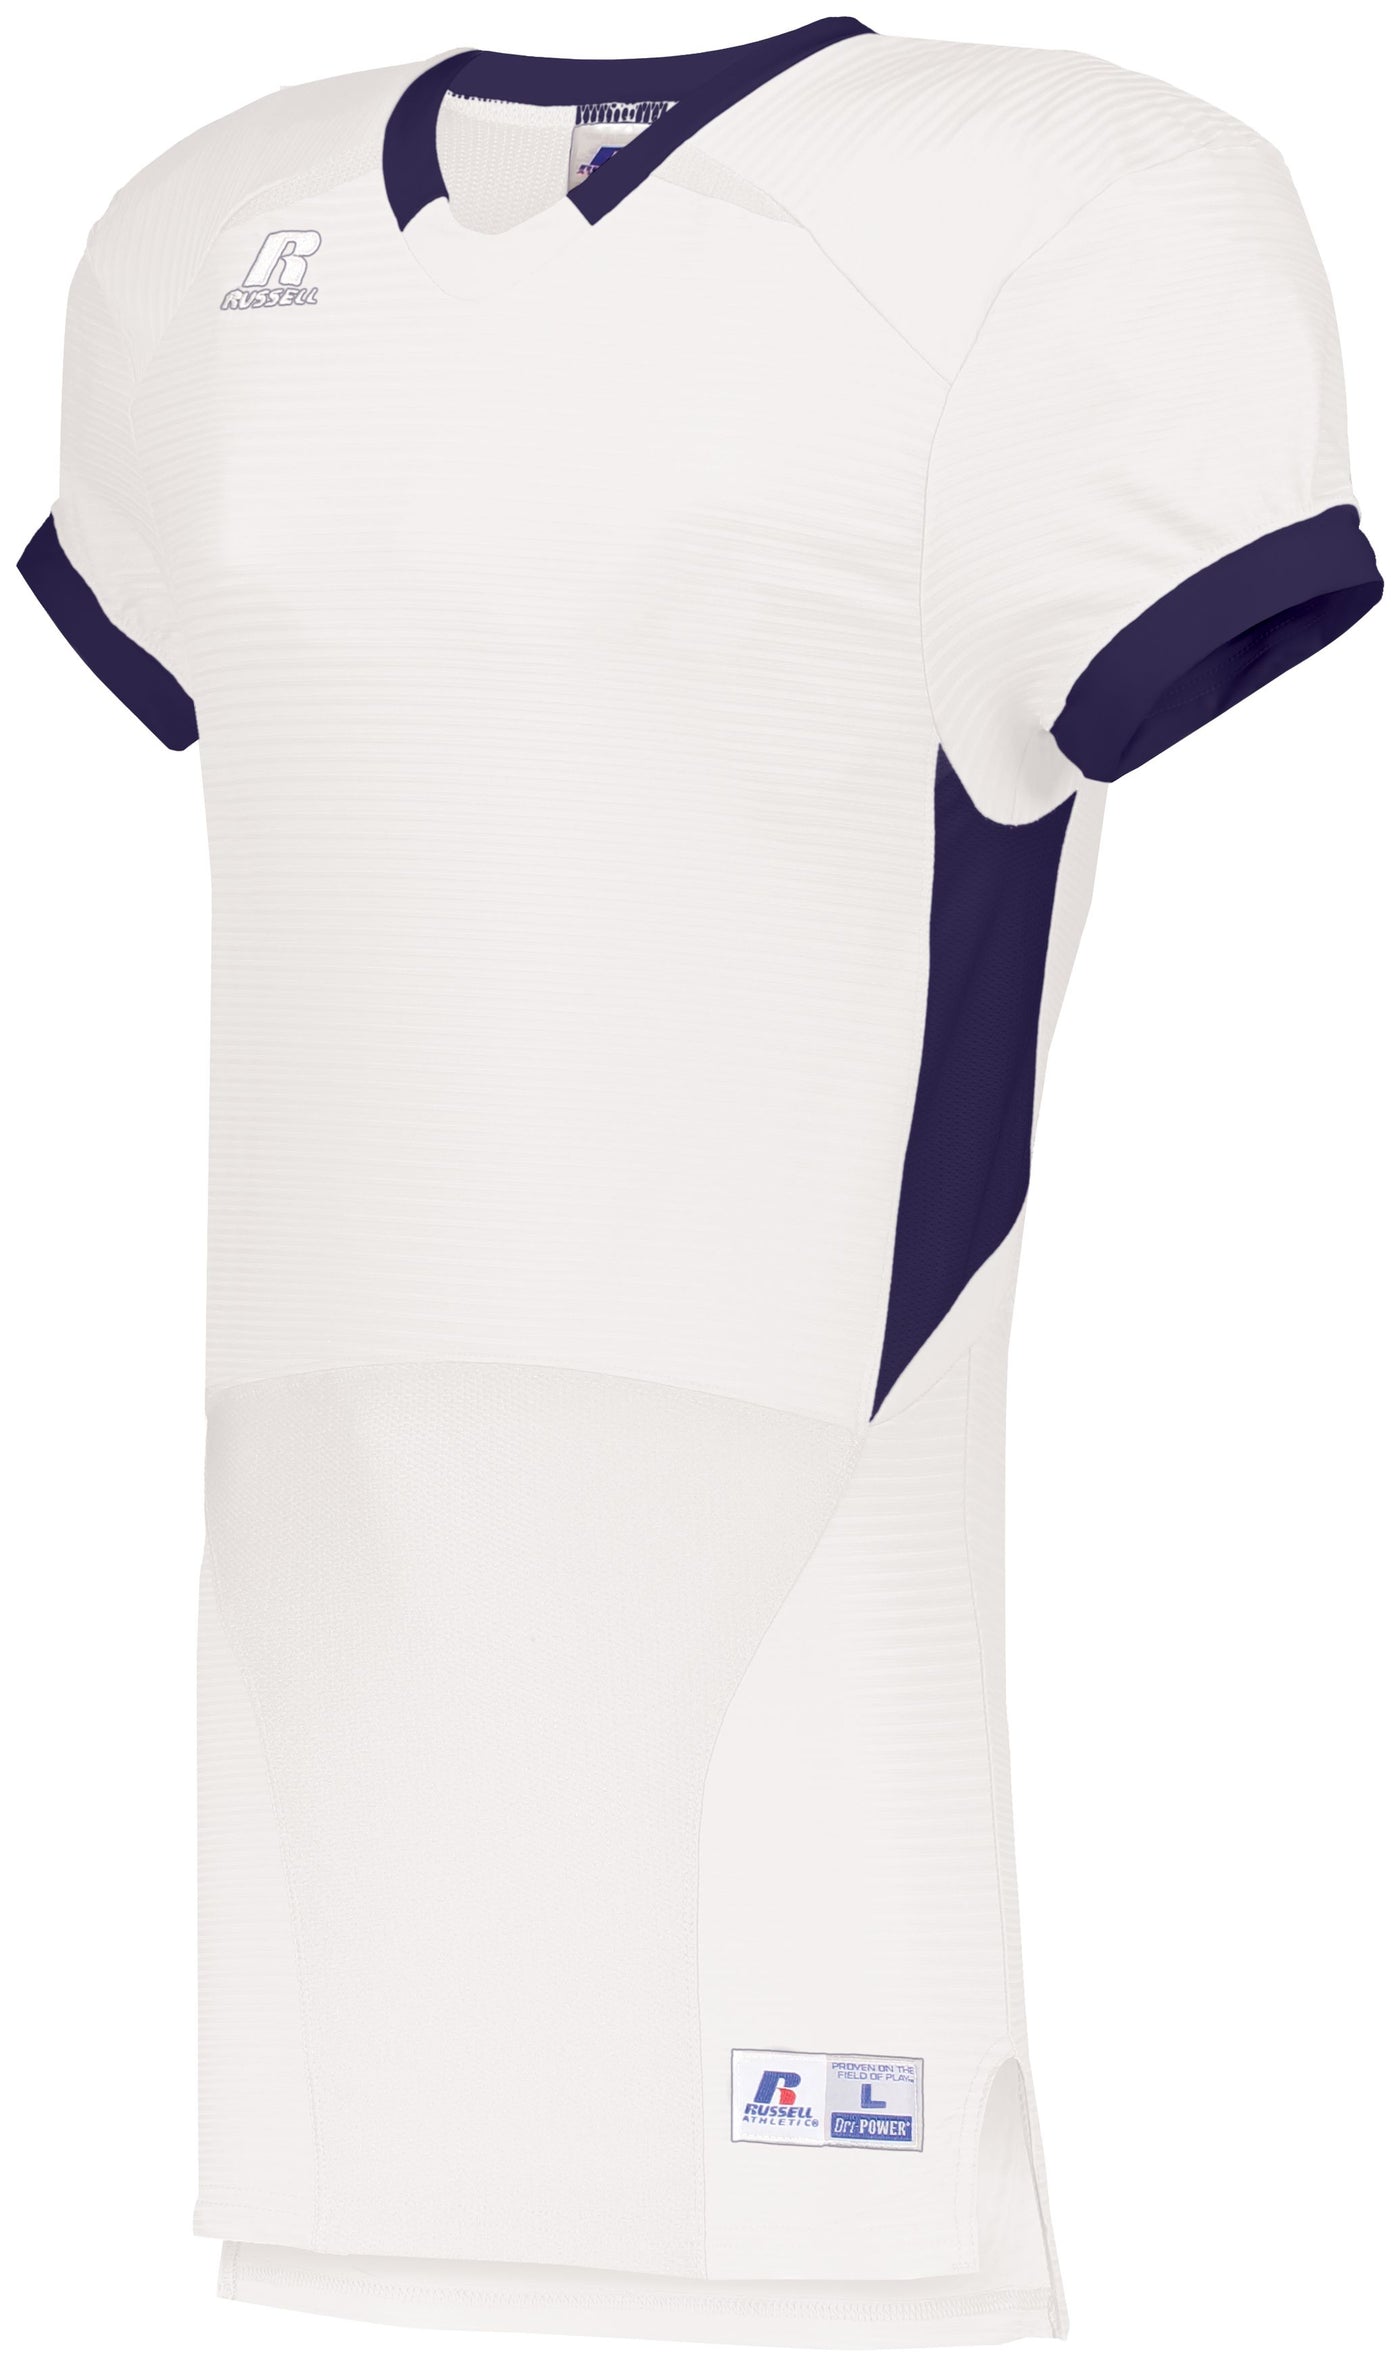 : UNLEASH YOUR TEAM'S WINNING STYLE WITH THE RUSSELL TEAM COLOR BLOCK GAME JERSEY